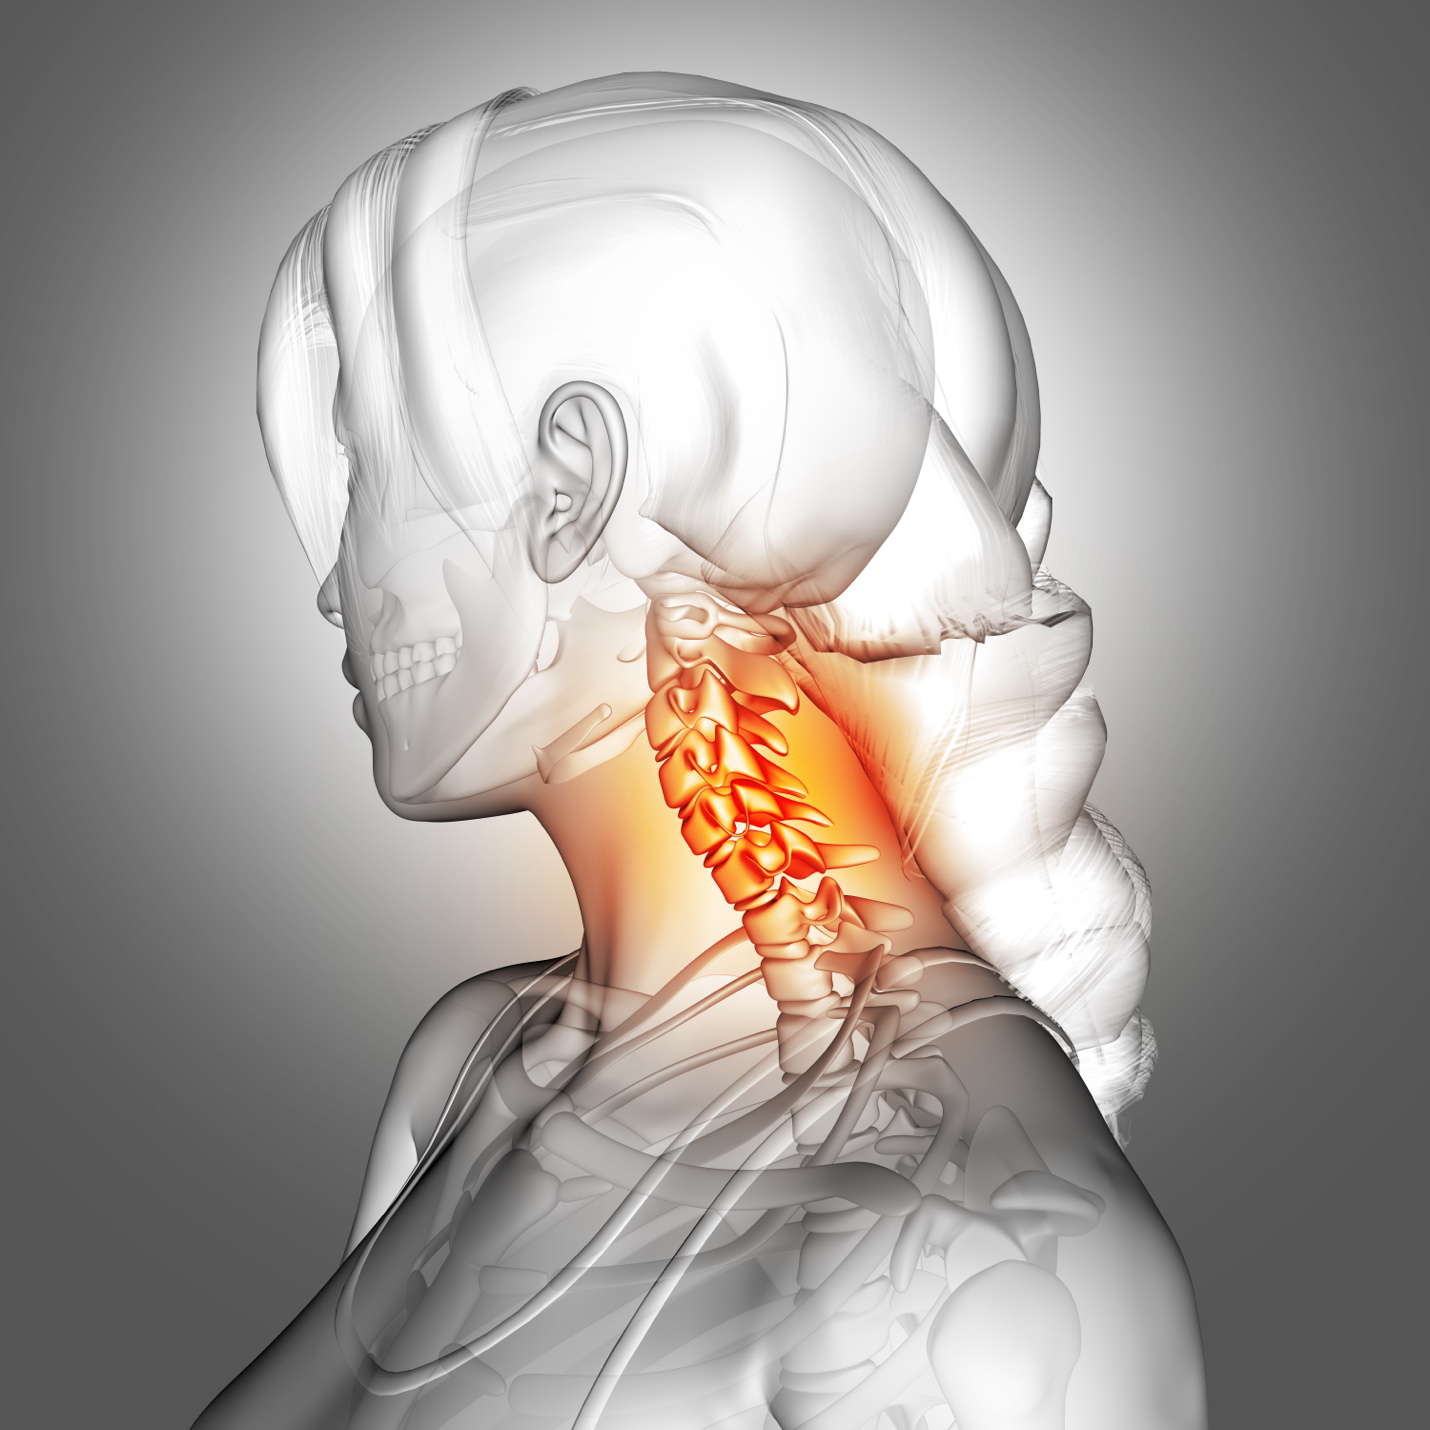 A 3D female figure with the cervical spine near the head highlighted in reddish orange.